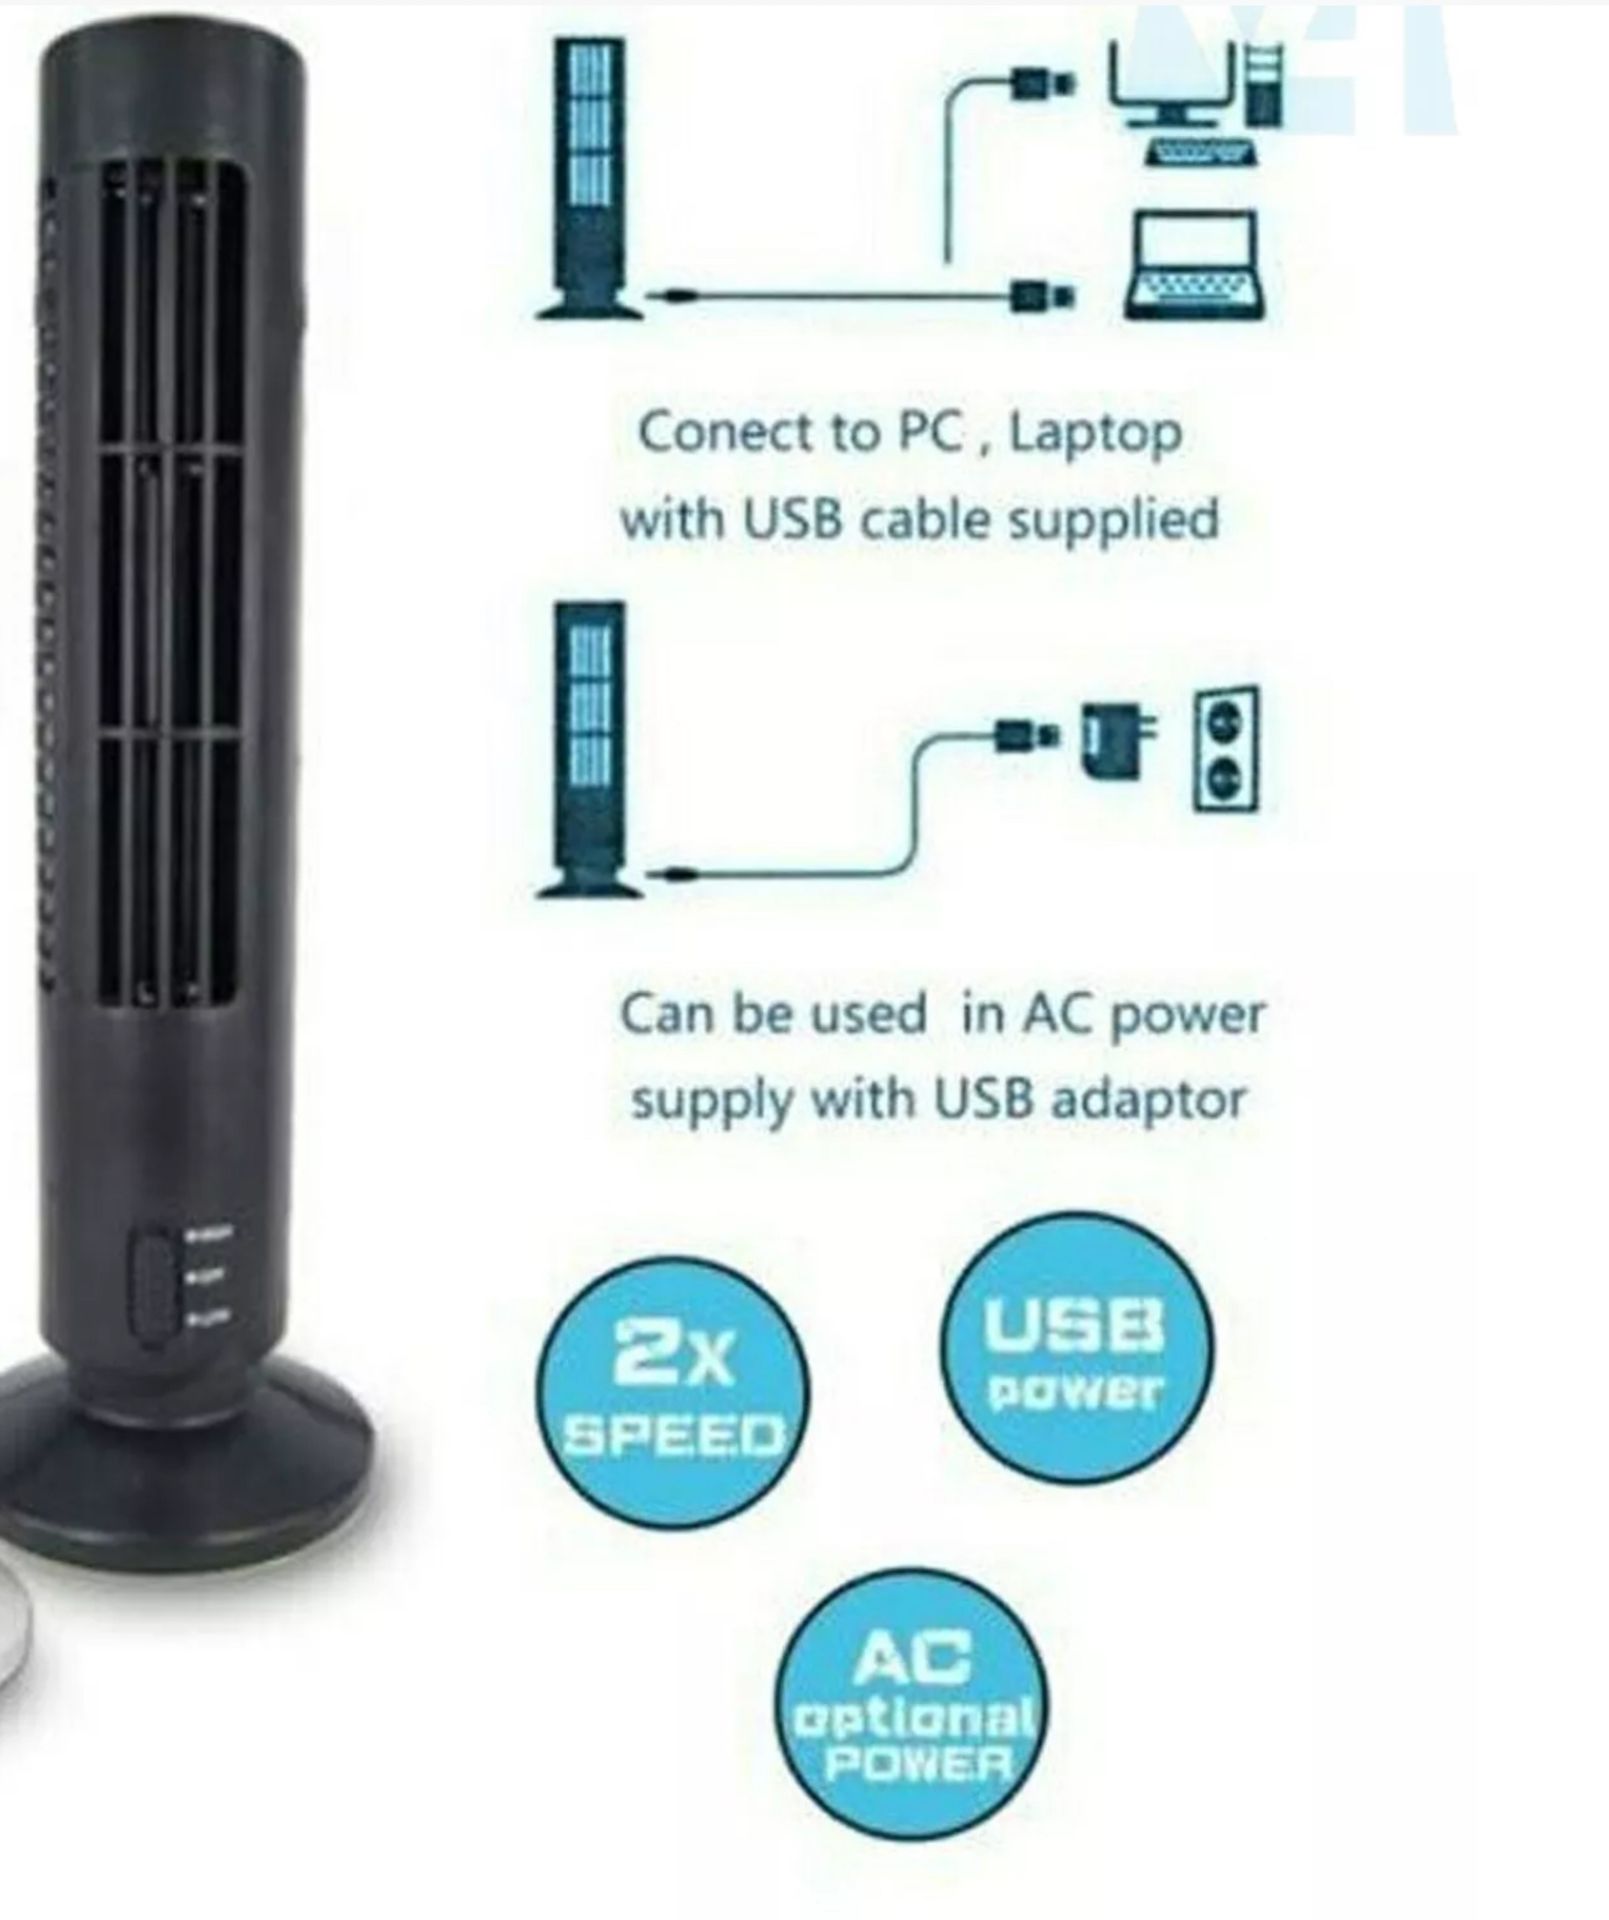 Brand New Portable Usb Tower Fan Cooling Bladeless 2 Speed Air Conditioner Pc Laptop Desk - Image 2 of 3